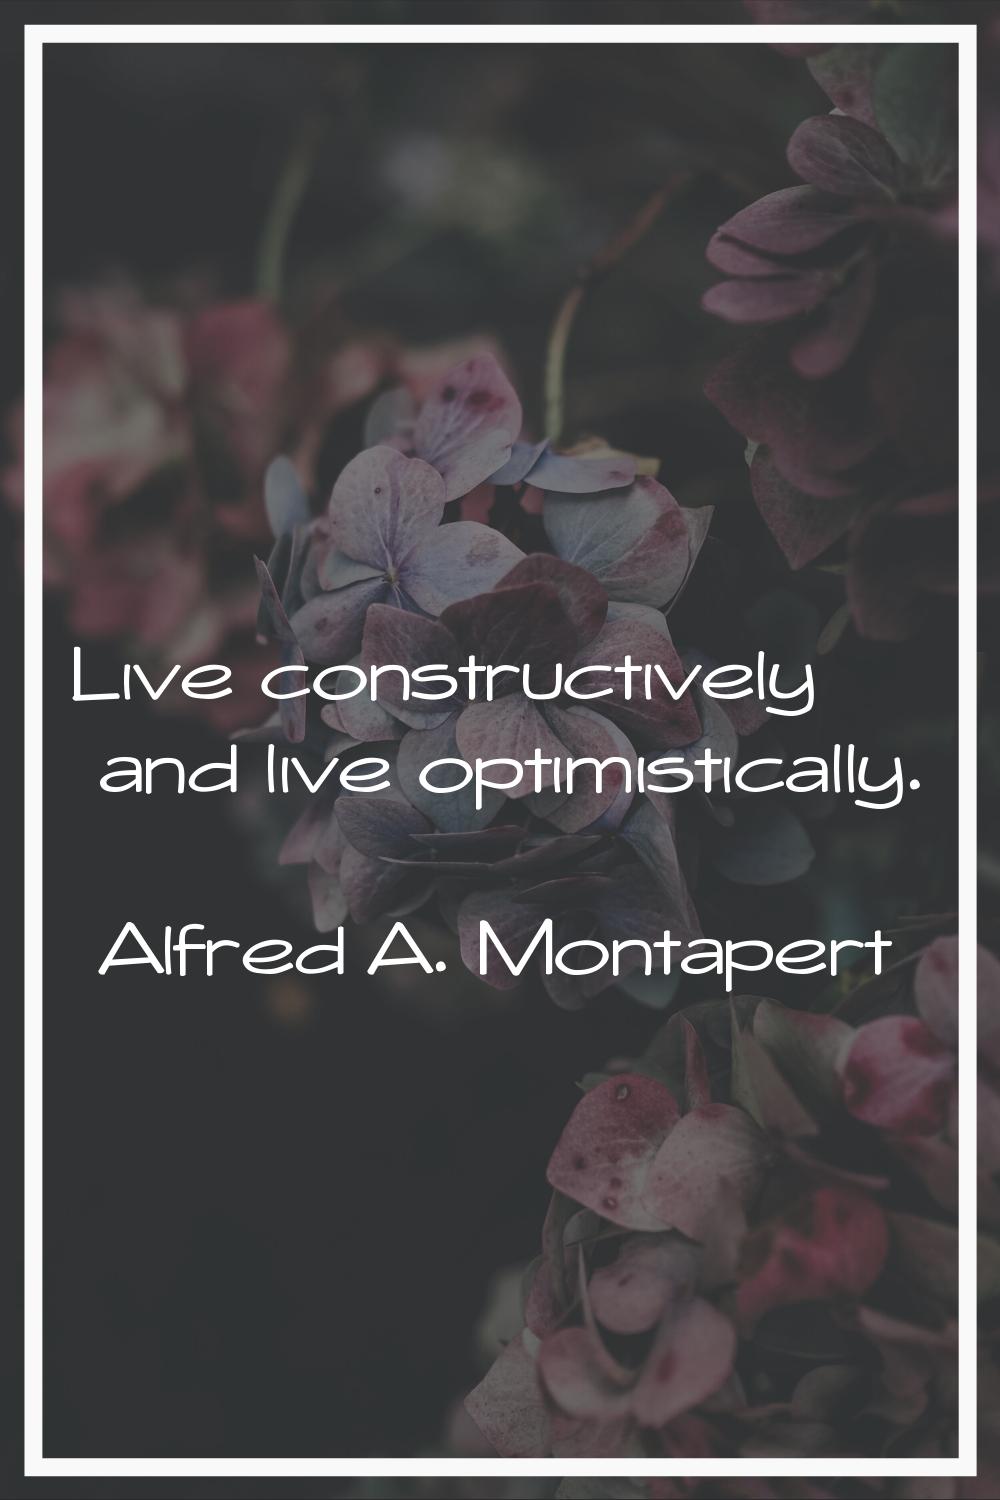 Live constructively and live optimistically.